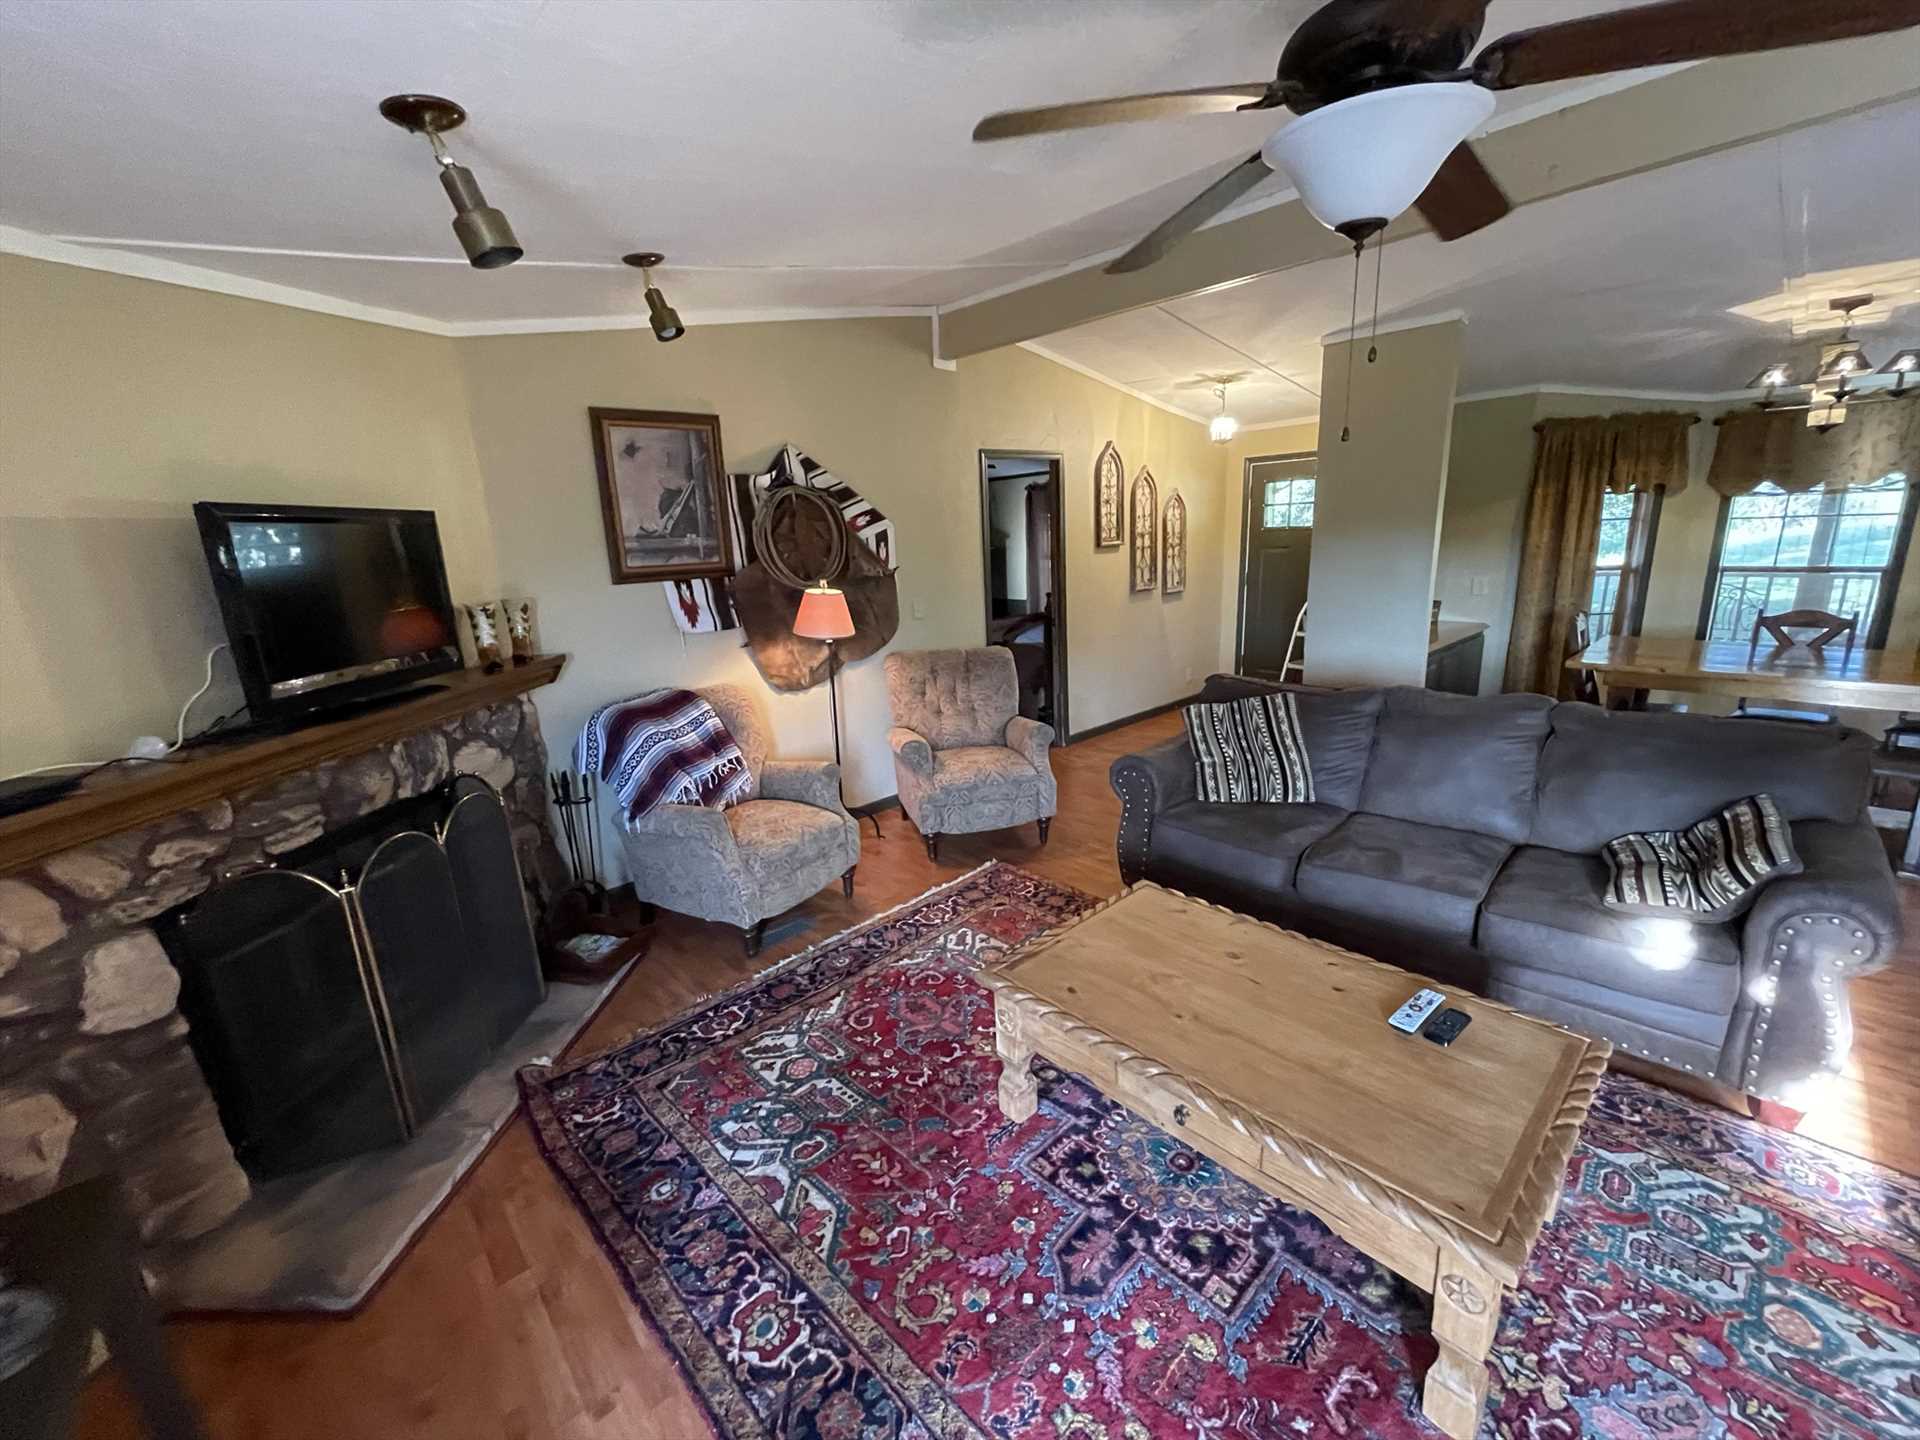                                                 Rio Vista's living area is an amazing hang-out spot, there's a fireplace, smart TV with satellite service, Wifi, and plenty of space and plush furniture.